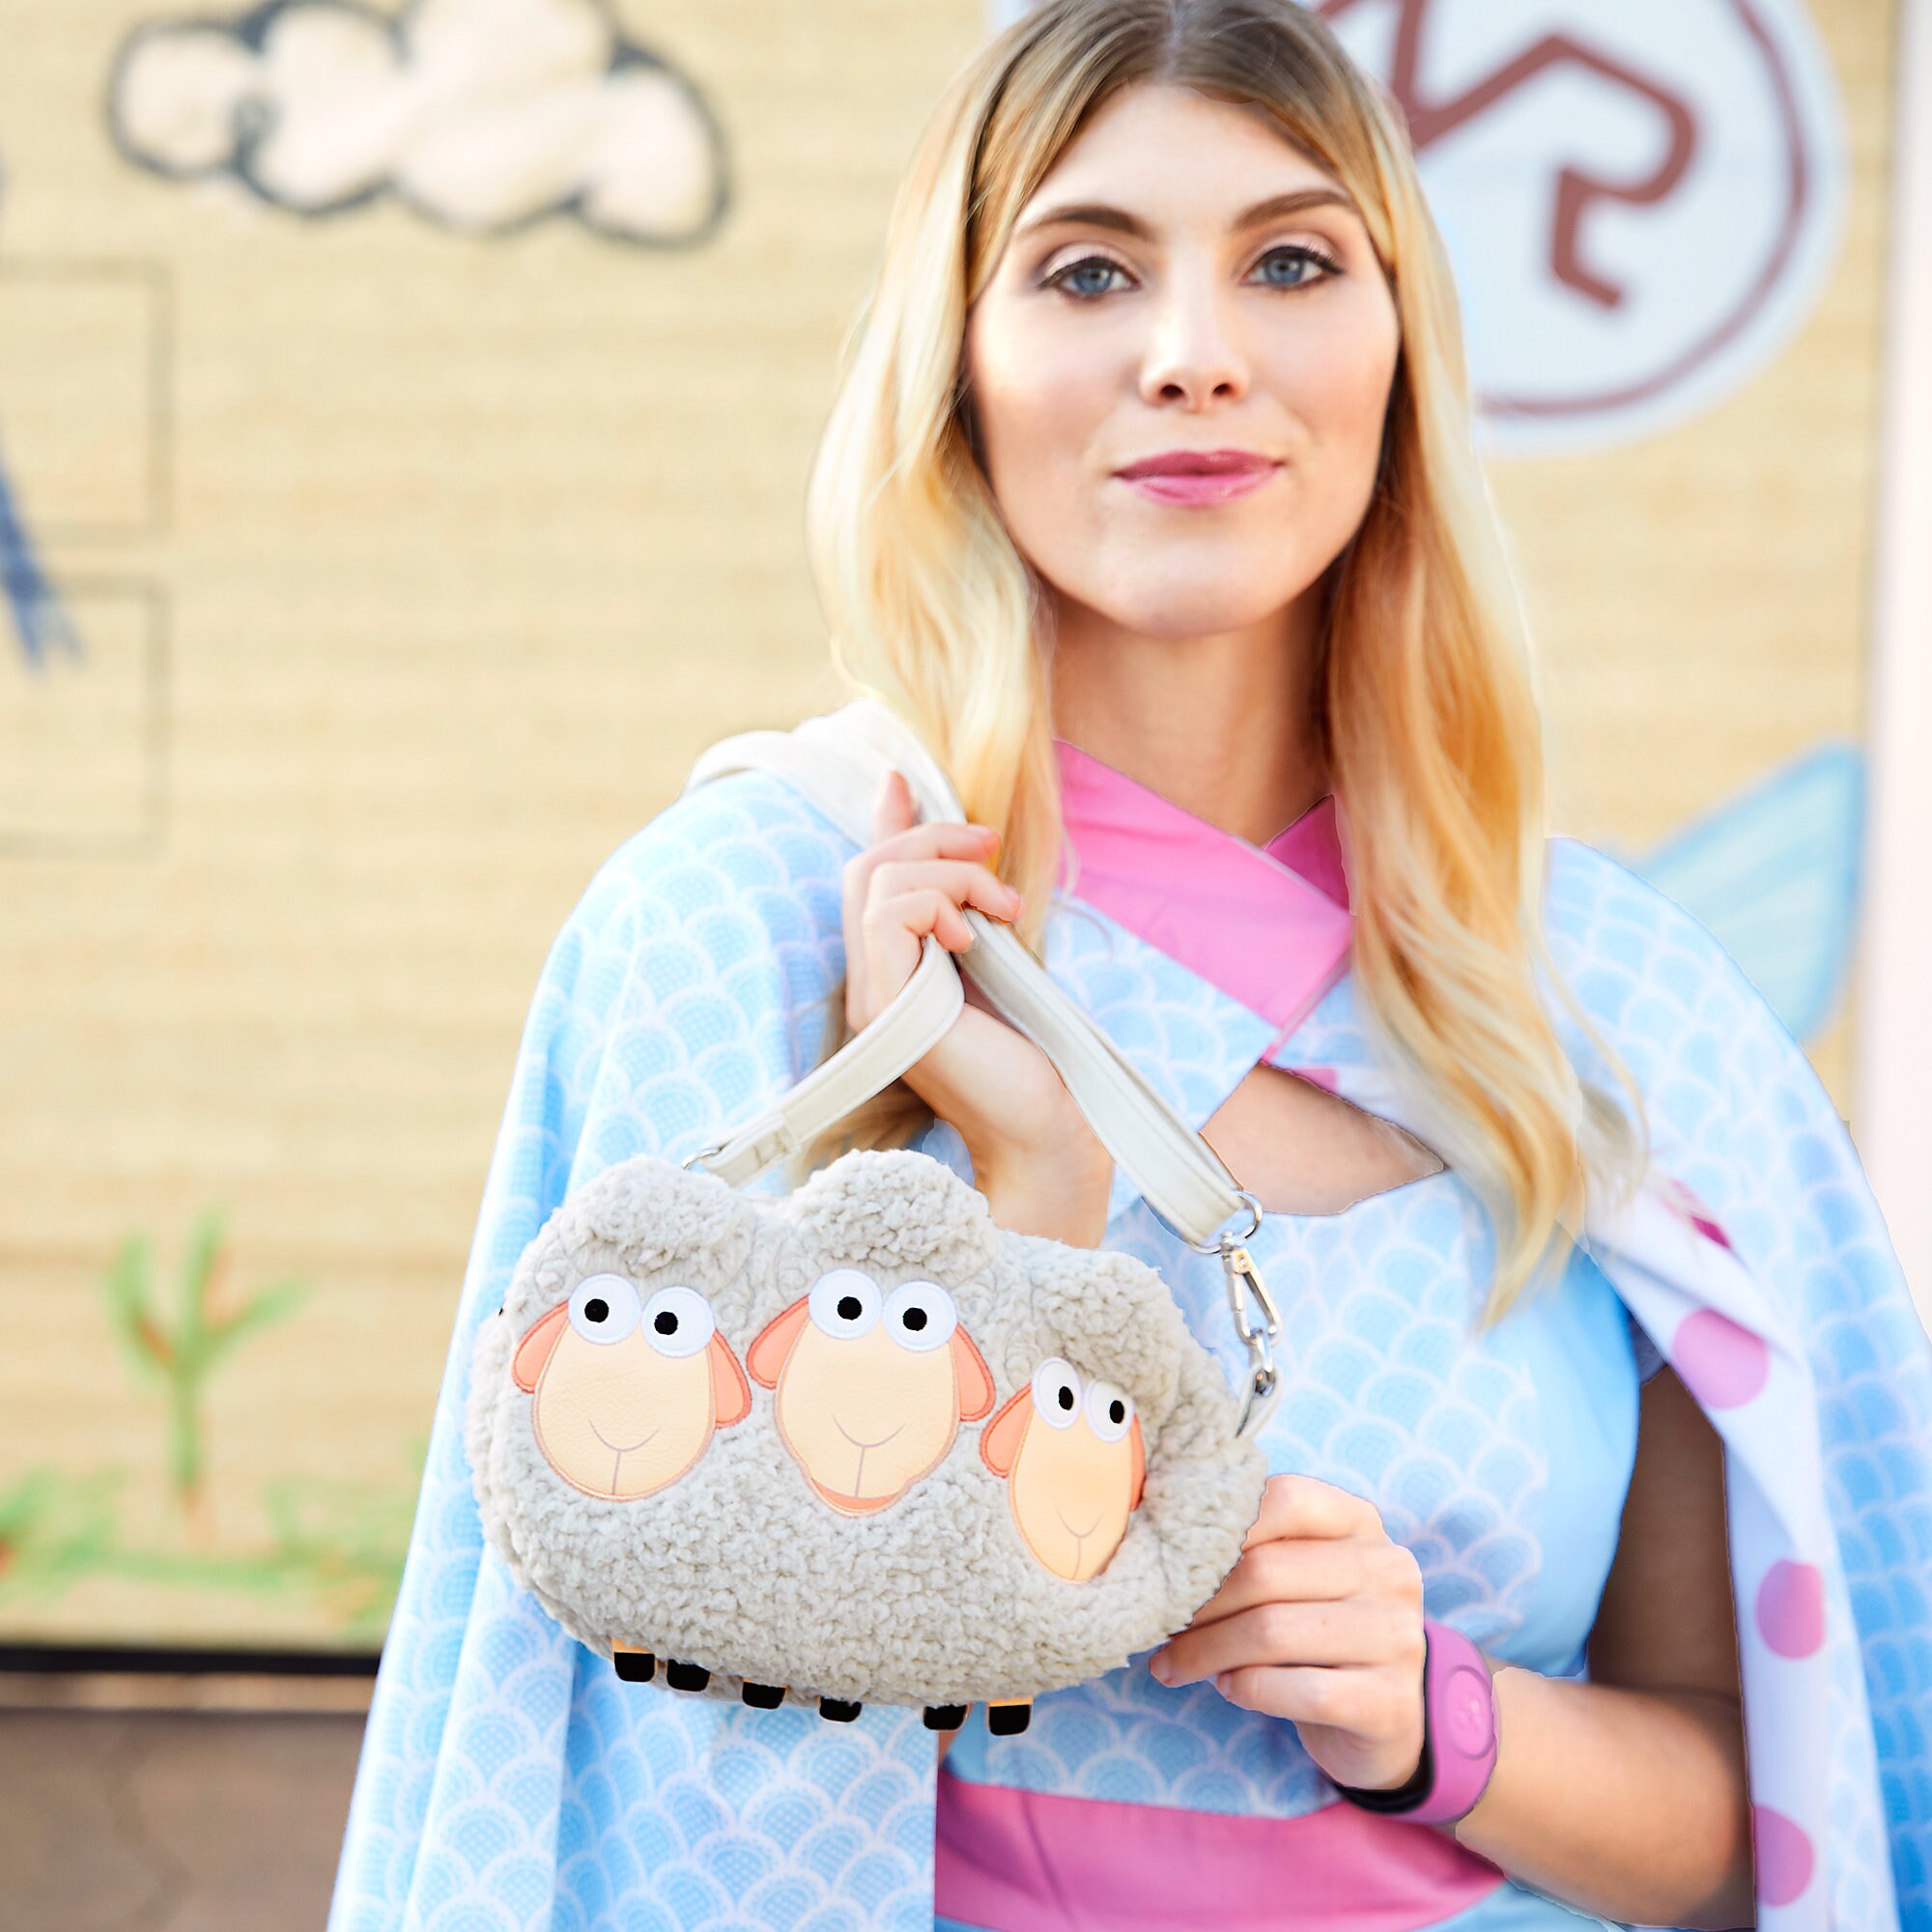 Billy, Goat, and Gruff Crossbody Bag by Loungefly - Toy Story 4